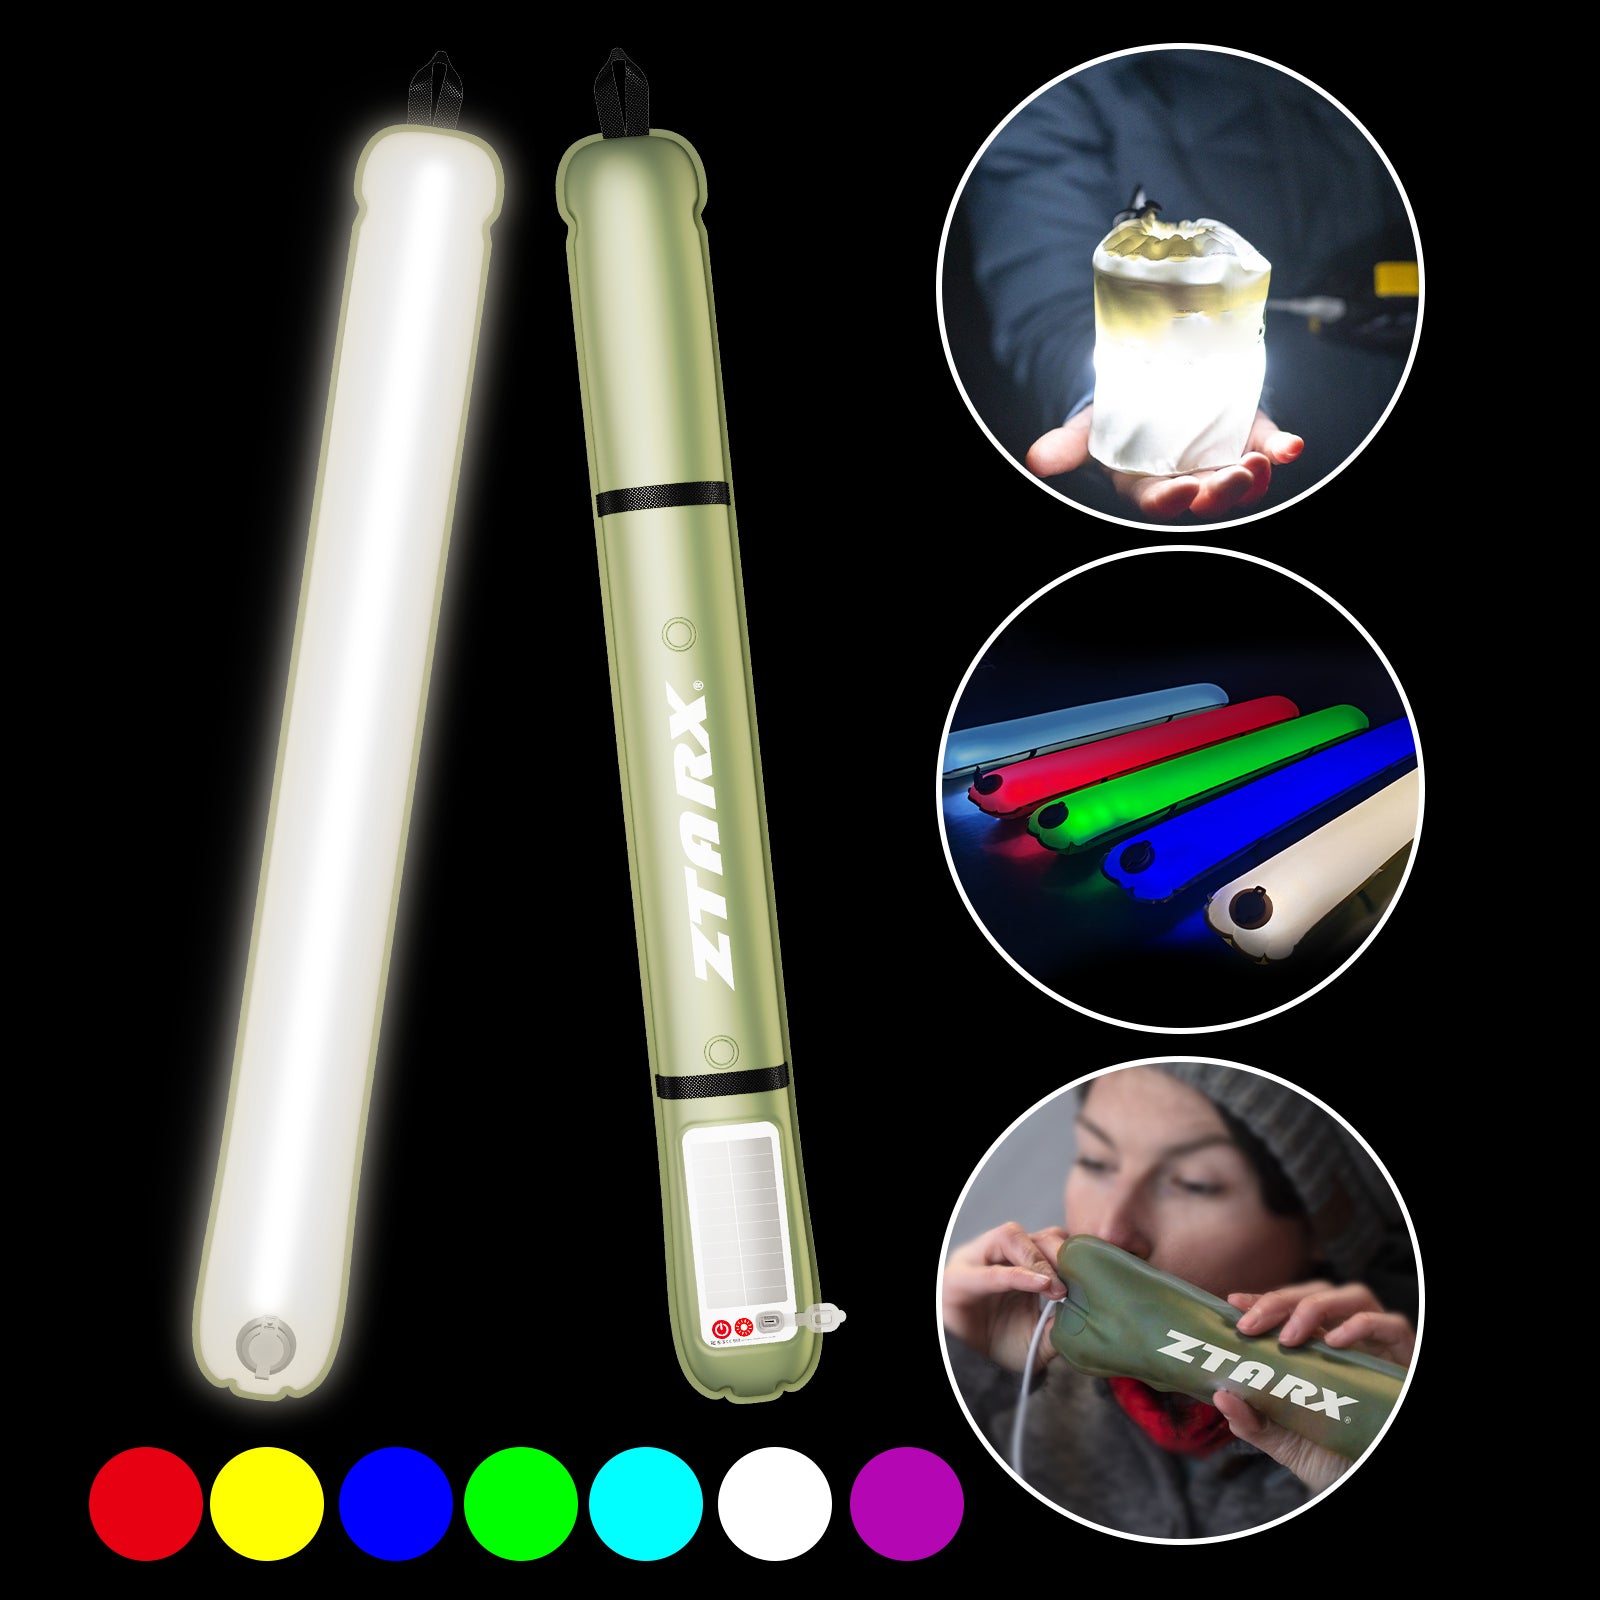 Ztarx Tube-A2.0-86 Rainbow LED Tube with Solar & USB Charging Built-in Battery